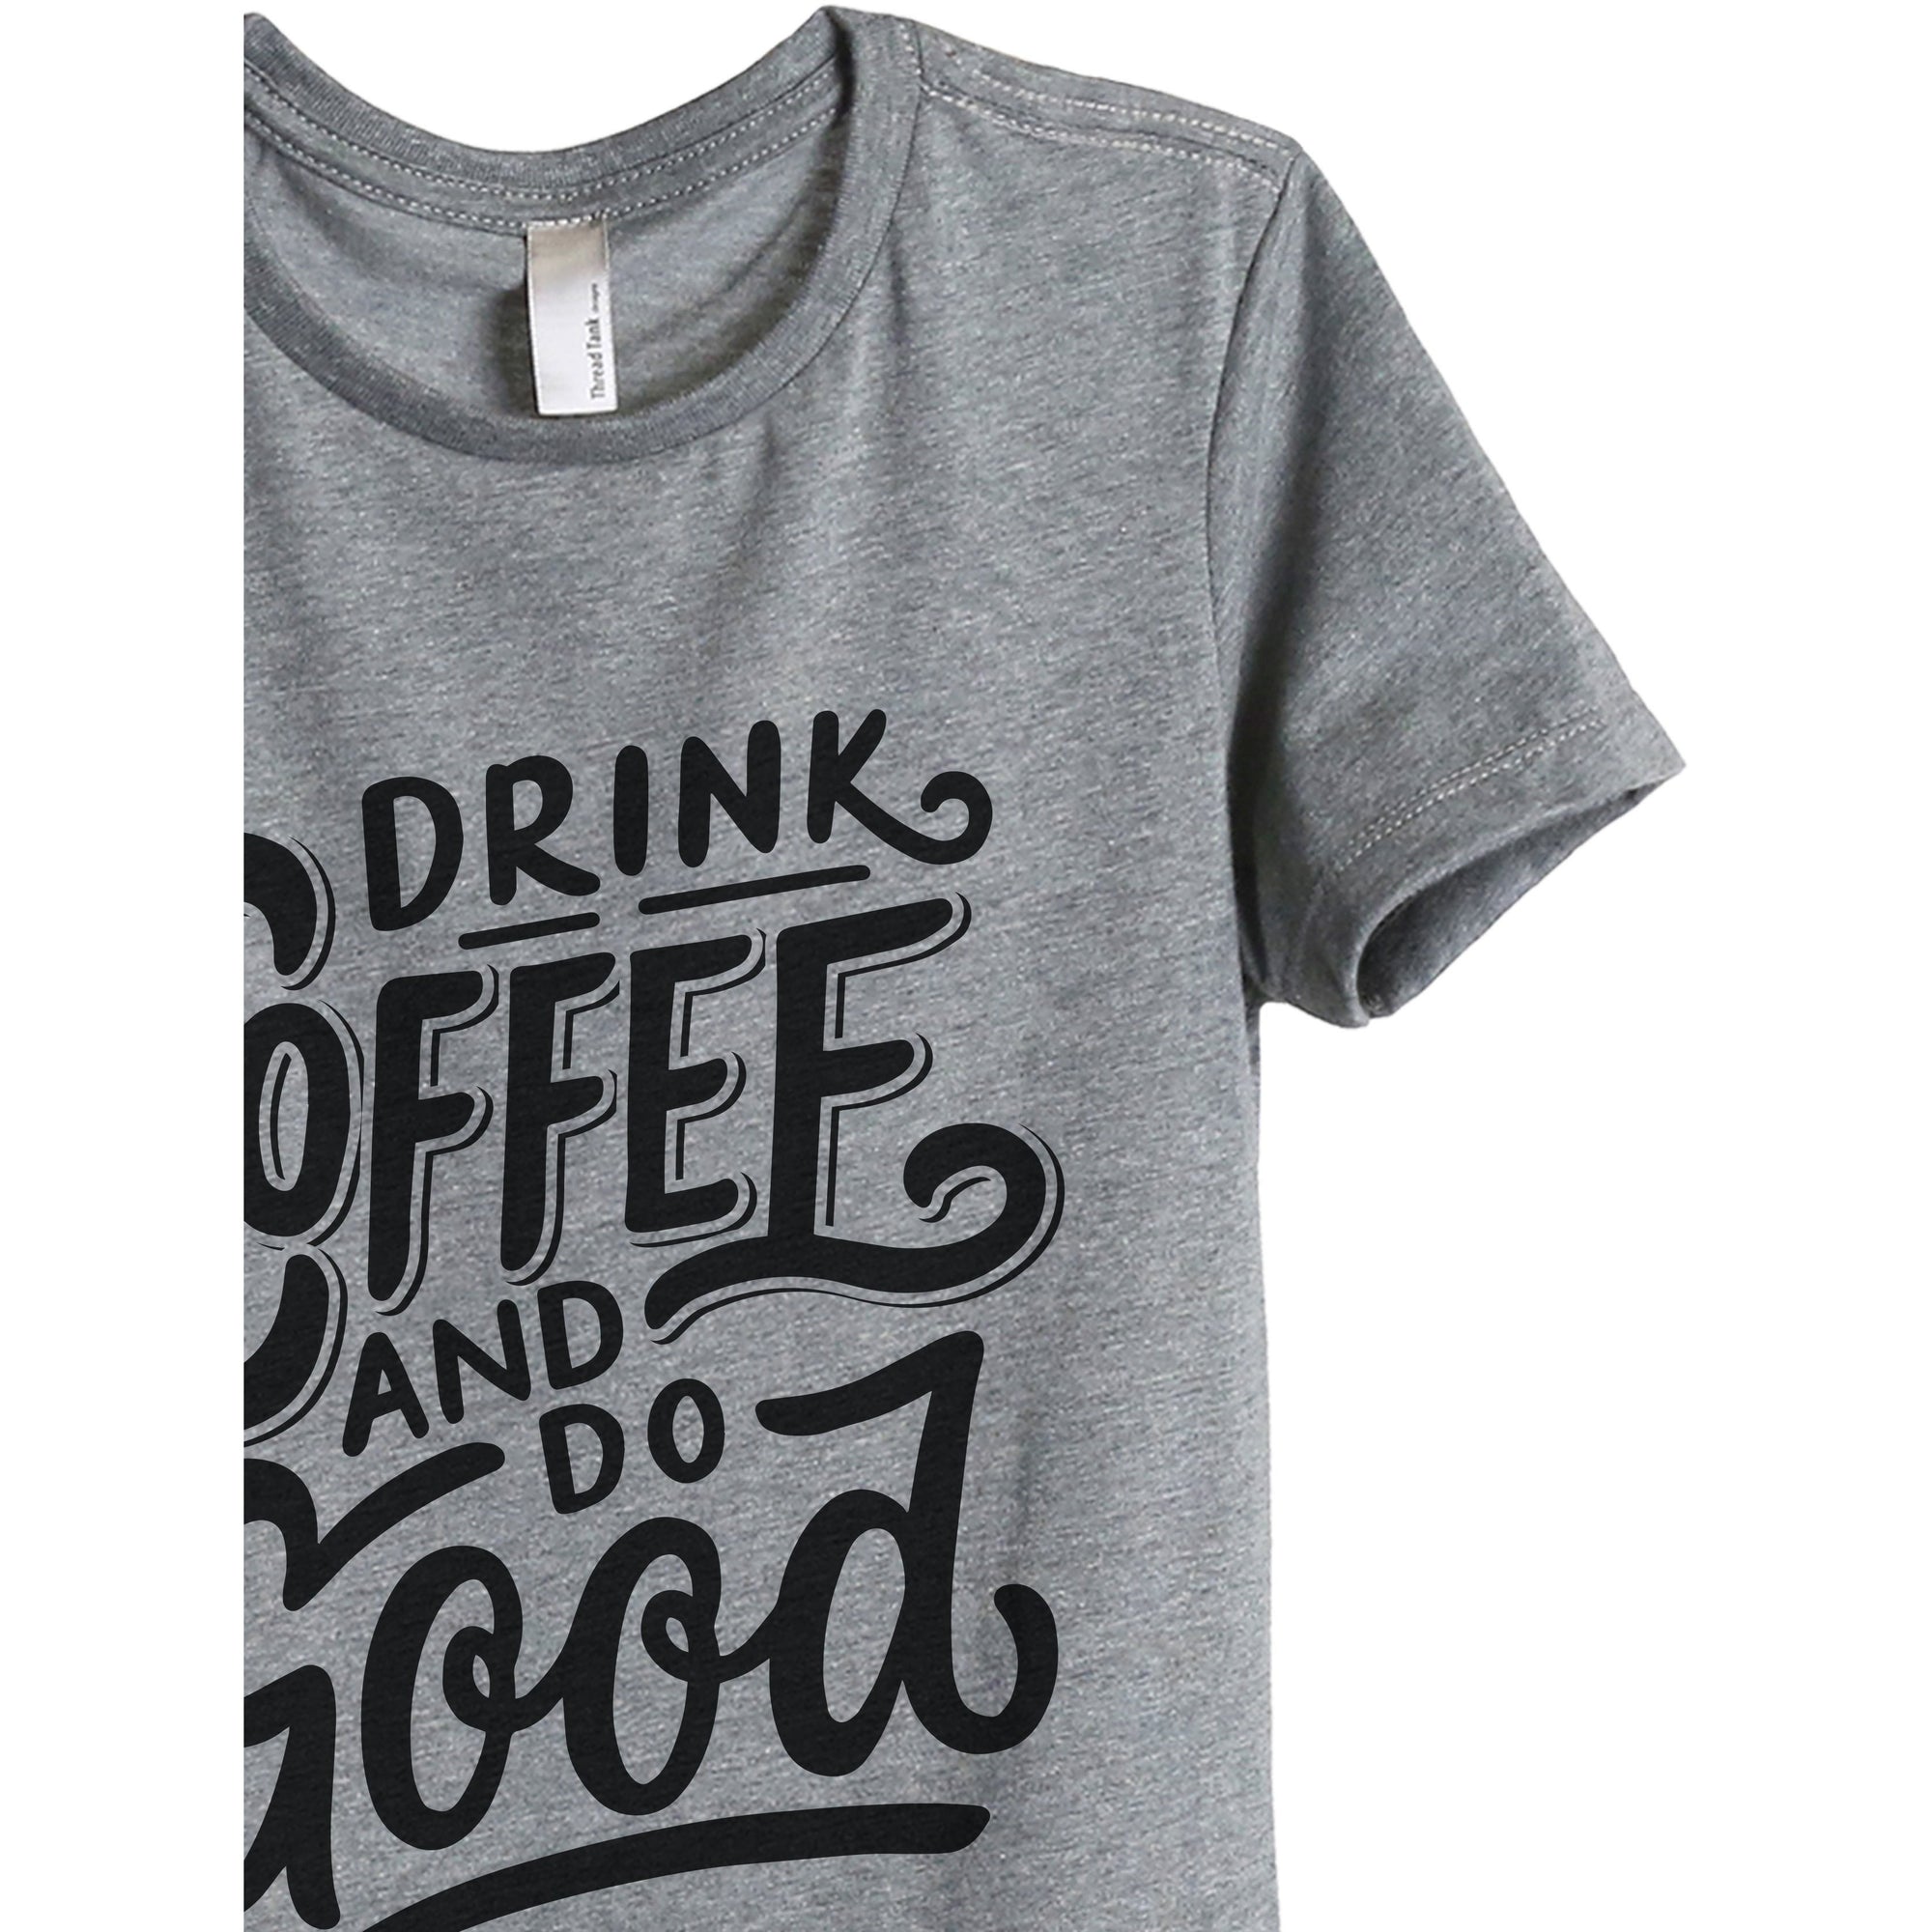 Drink Coffee And Do Good - Stories You Can Wear by Thread Tank